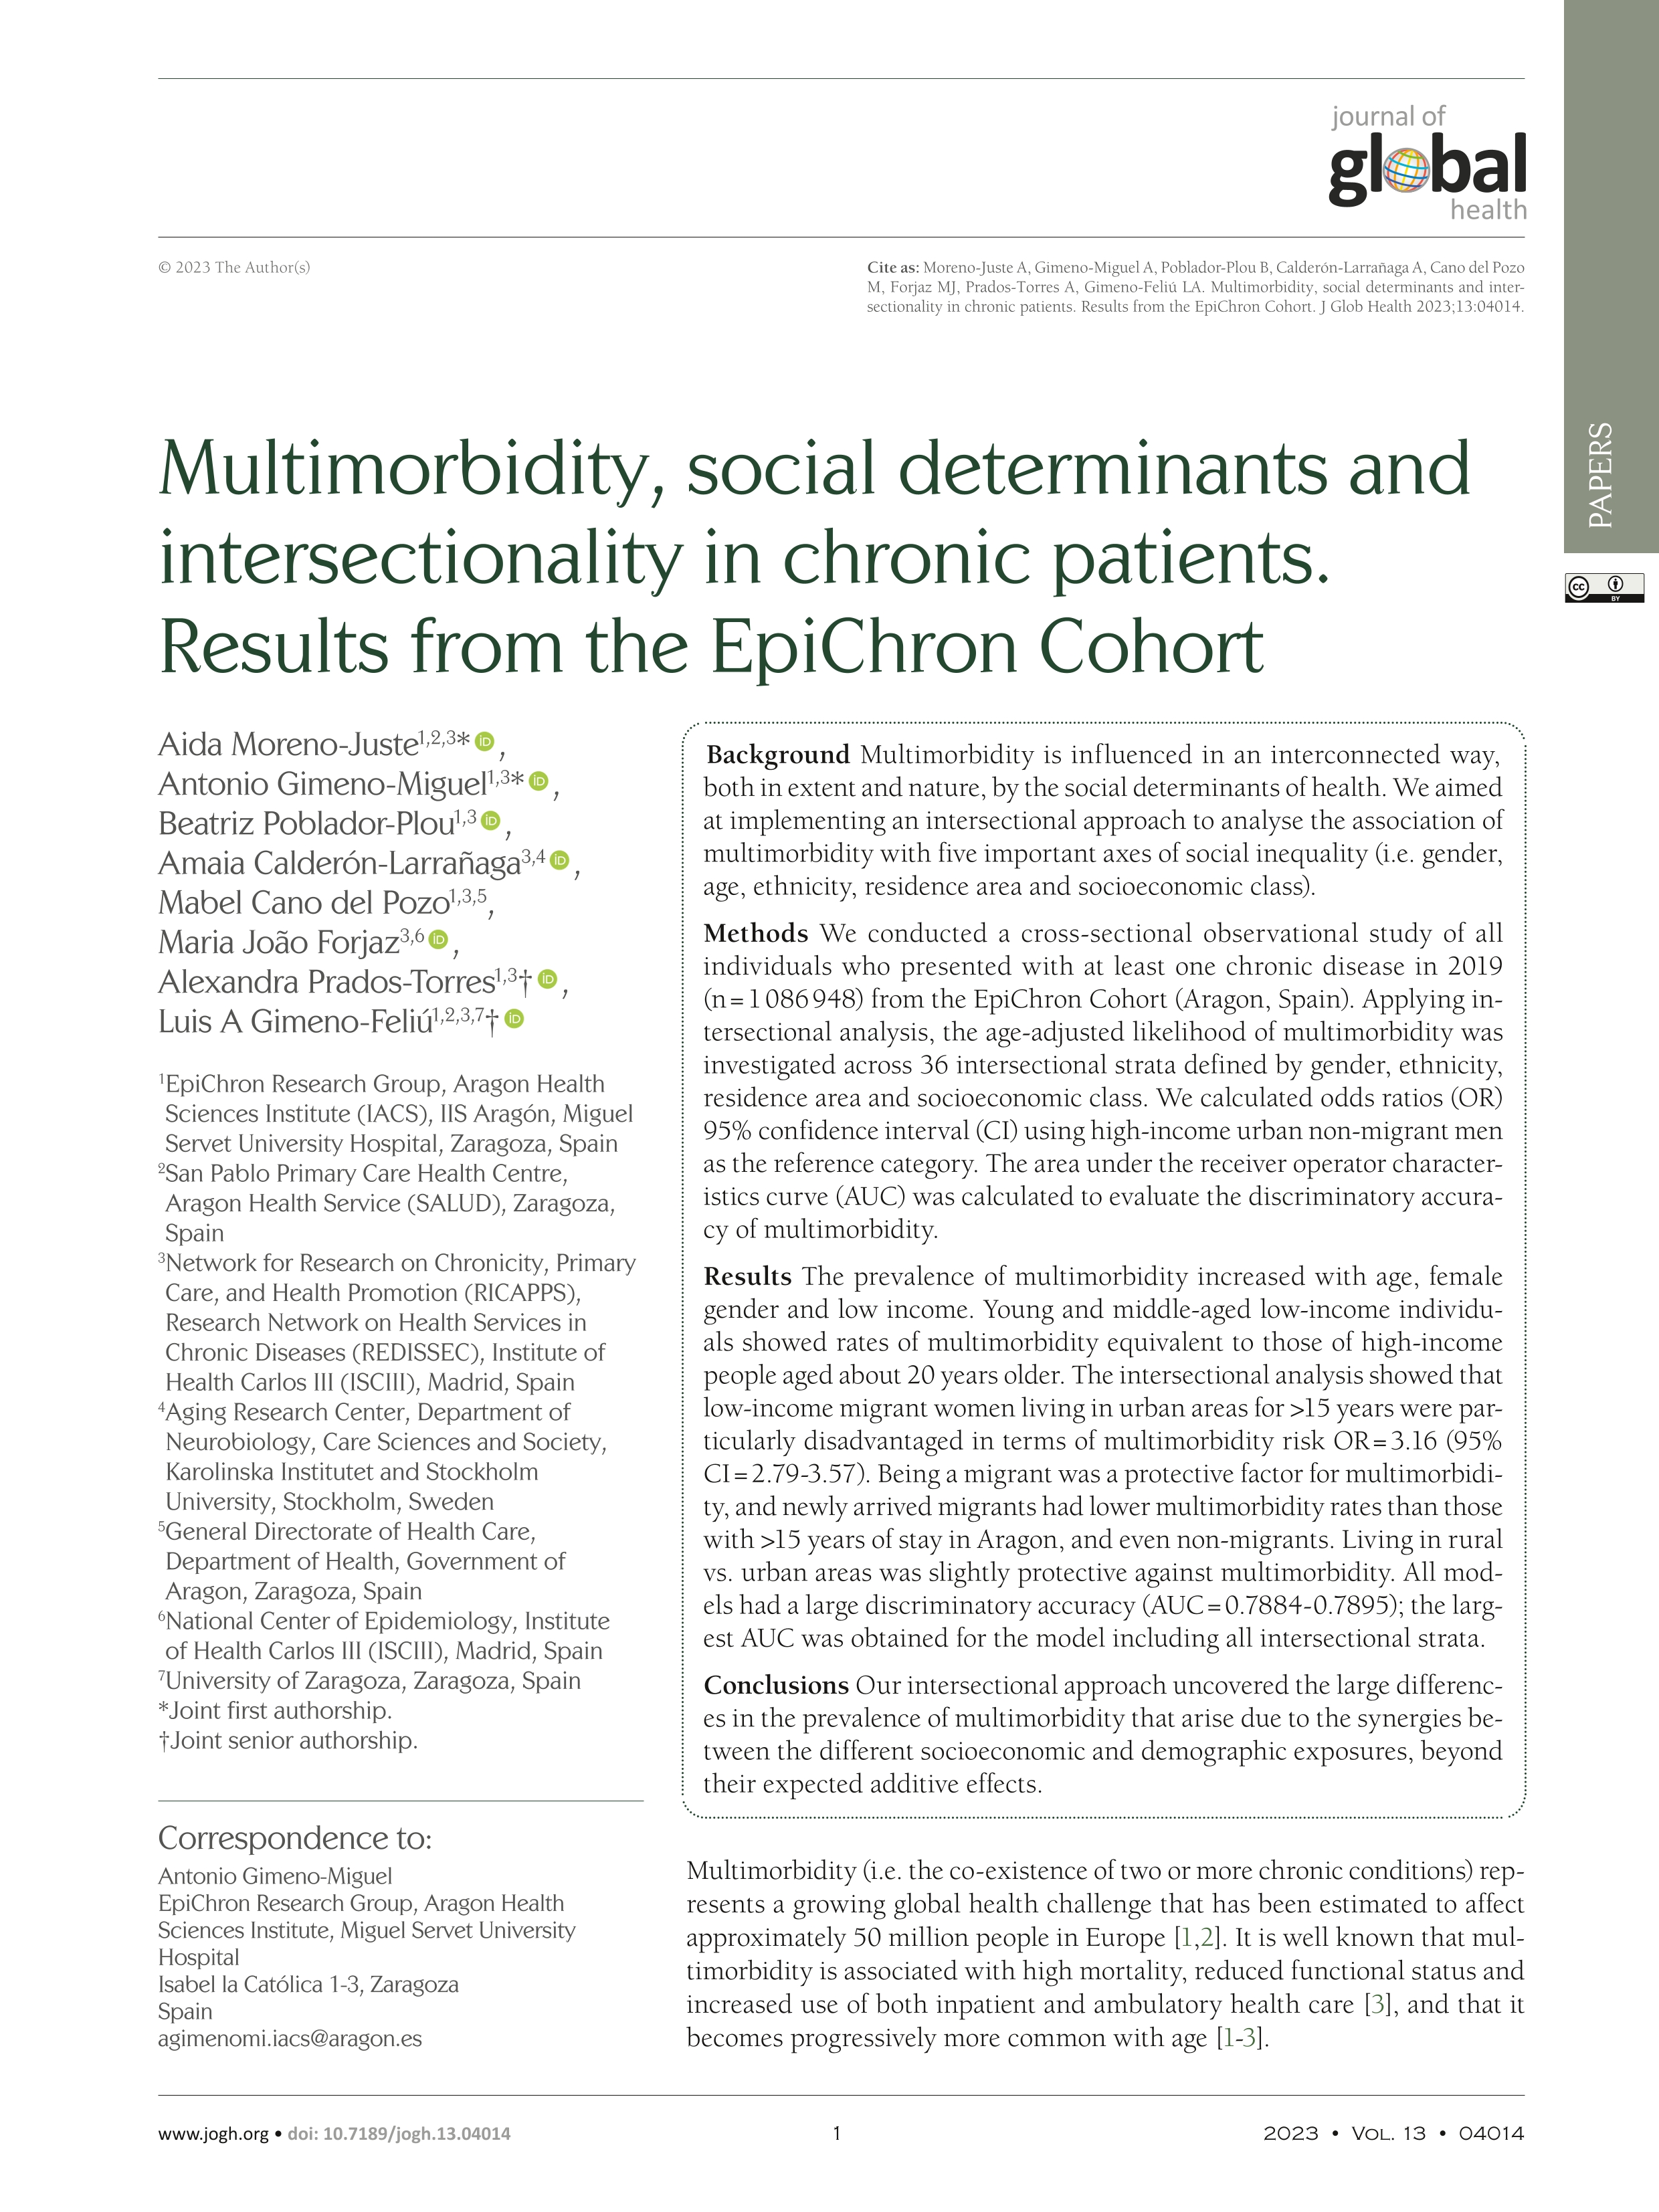 Multimorbidity, social determinants and intersectionality in chronic patients. Results from the EpiChron Cohort